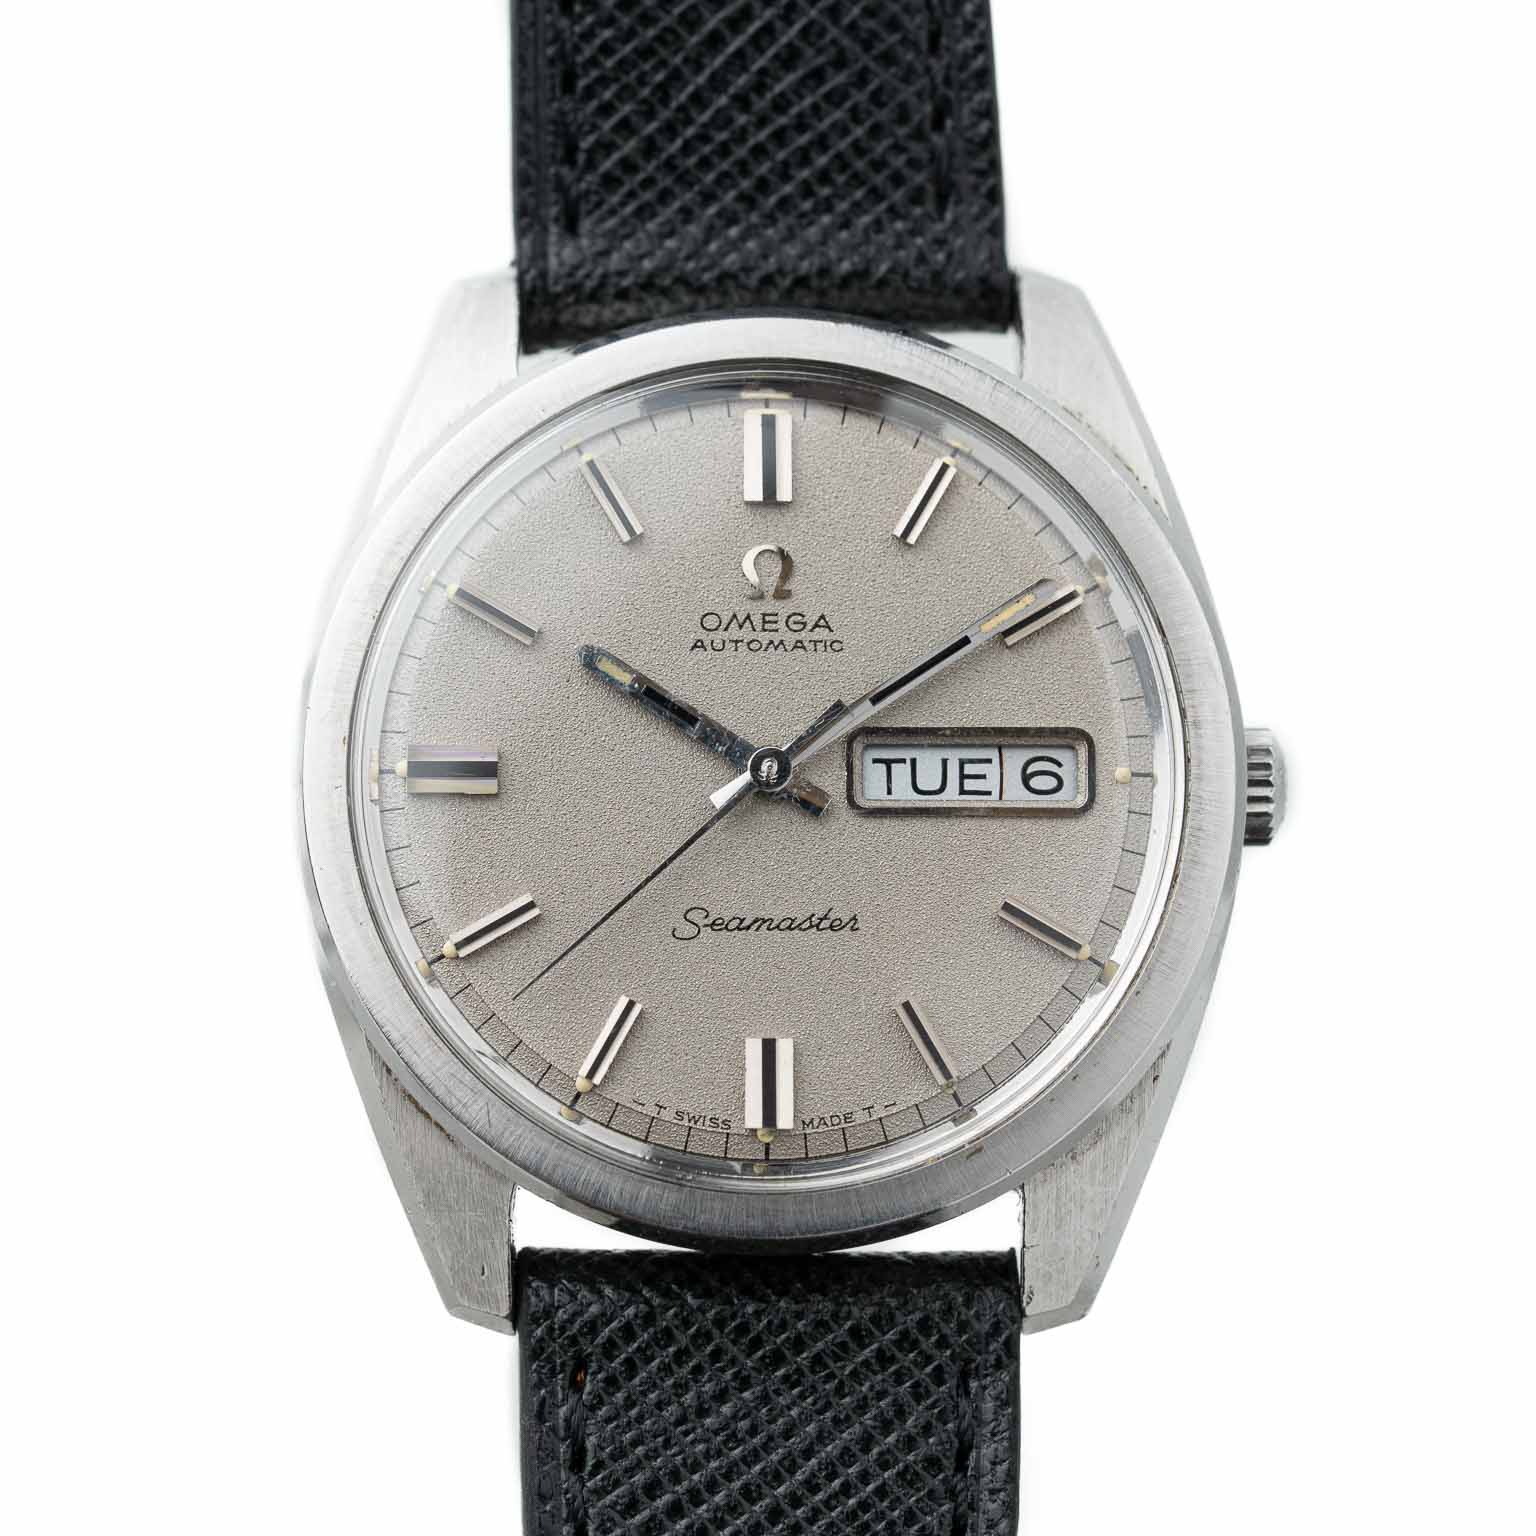 Vintage Omega Seamaster day date with grey dial 168.023 from 1969 watch front